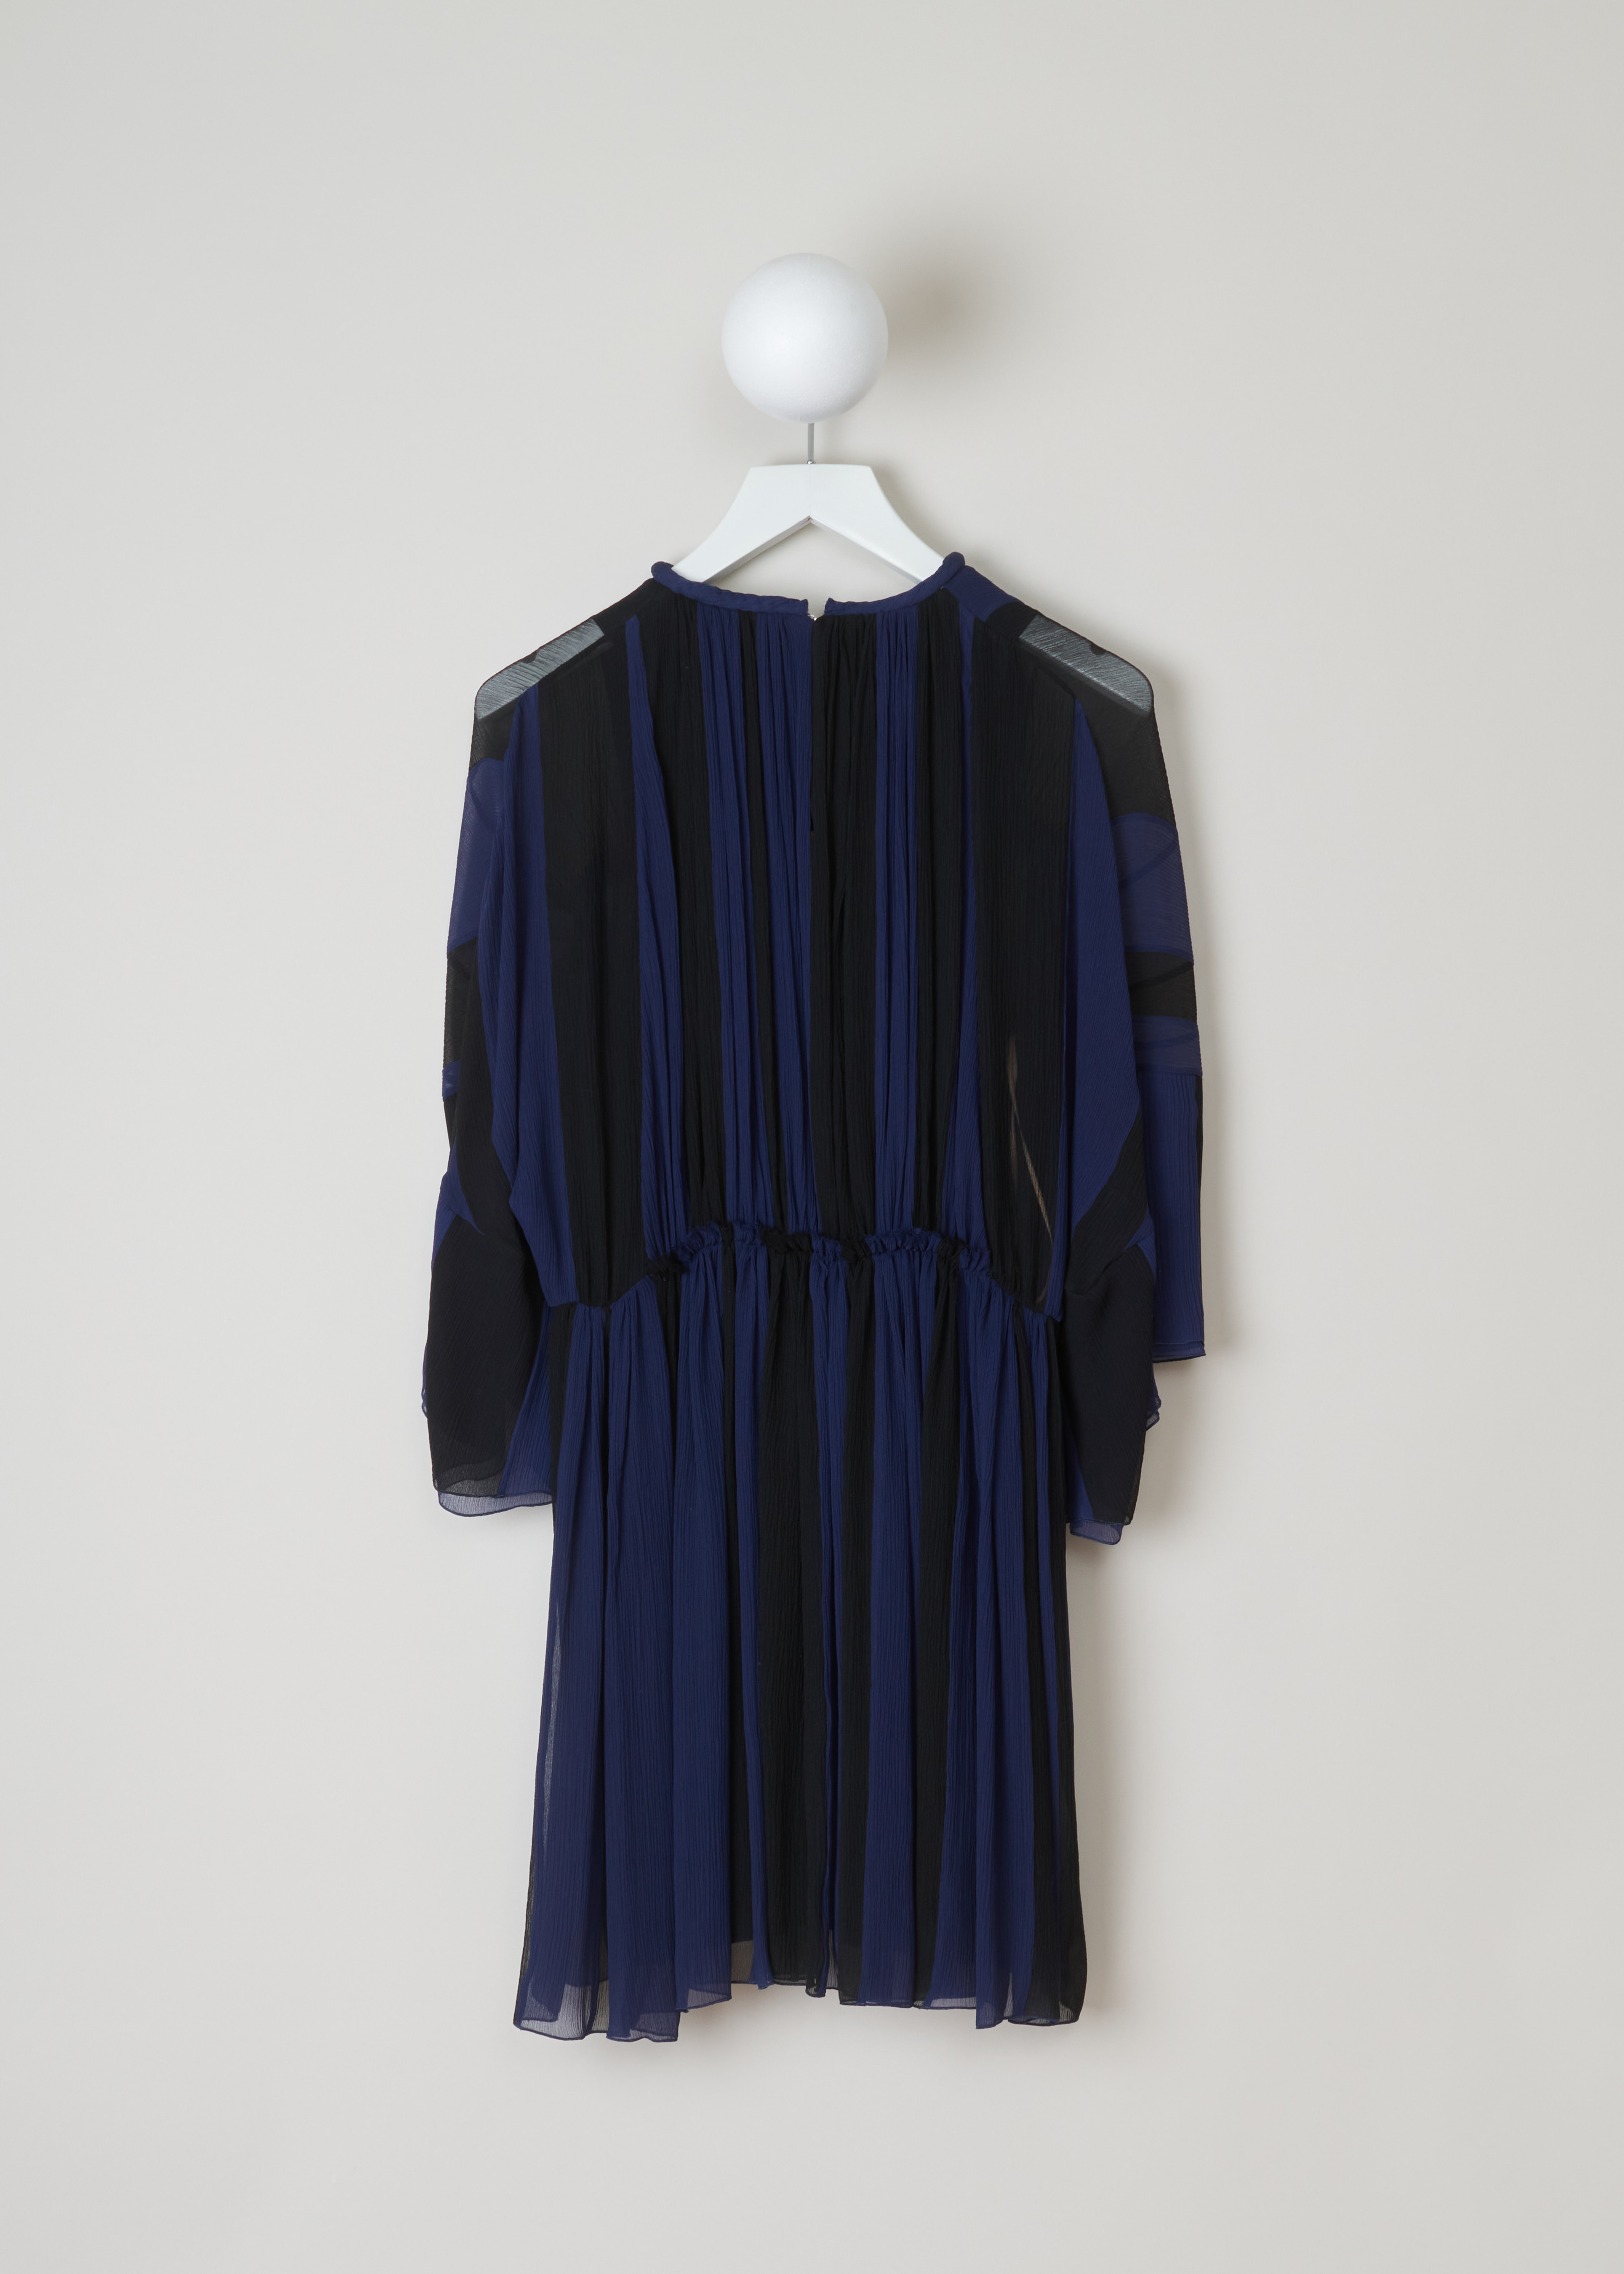 Chloé Gathered slik crepe dress CHC19ARO37006925_925_Black_Blue back. This chic silk crepe dress has a blue and black vertically striped pattern. A gathered round neckline and ruffled sheer long sleeves. A ruffled waist and flared gathered midi skirt. 